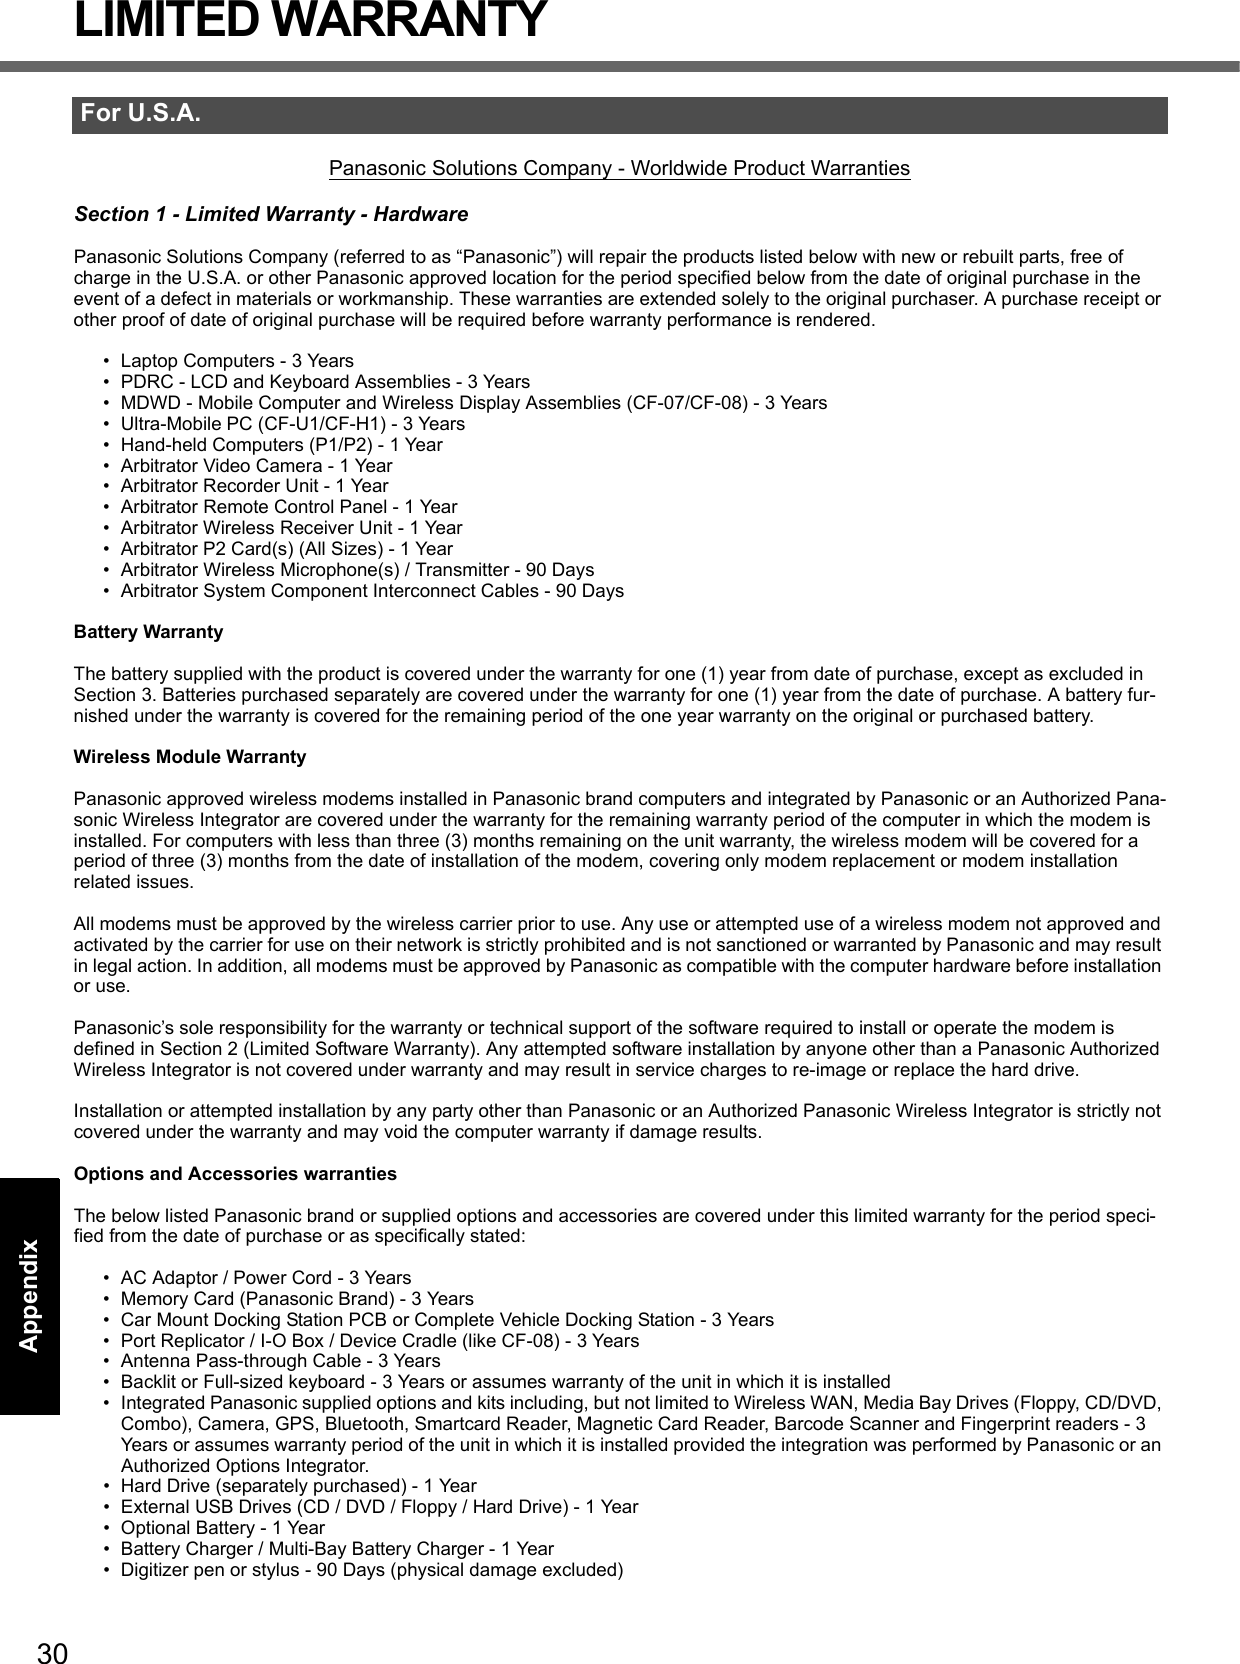 30Getting StartedUseful InformationTroubleshootingAppendixLIMITED WARRANTYPanasonic Solutions Company - Worldwide Product WarrantiesSection 1 - Limited Warranty - HardwarePanasonic Solutions Company (referred to as “Panasonic”) will repair the products listed below with new or rebuilt parts, free of charge in the U.S.A. or other Panasonic approved location for the period specified below from the date of original purchase in the event of a defect in materials or workmanship. These warranties are extended solely to the original purchaser. A purchase receipt or other proof of date of original purchase will be required before warranty performance is rendered. • Laptop Computers - 3 Years• PDRC - LCD and Keyboard Assemblies - 3 Years• MDWD - Mobile Computer and Wireless Display Assemblies (CF-07/CF-08) - 3 Years• Ultra-Mobile PC (CF-U1/CF-H1) - 3 Years• Hand-held Computers (P1/P2) - 1 Year• Arbitrator Video Camera - 1 Year• Arbitrator Recorder Unit - 1 Year• Arbitrator Remote Control Panel - 1 Year• Arbitrator Wireless Receiver Unit - 1 Year• Arbitrator P2 Card(s) (All Sizes) - 1 Year• Arbitrator Wireless Microphone(s) / Transmitter - 90 Days• Arbitrator System Component Interconnect Cables - 90 DaysBattery WarrantyThe battery supplied with the product is covered under the warranty for one (1) year from date of purchase, except as excluded in Section 3. Batteries purchased separately are covered under the warranty for one (1) year from the date of purchase. A battery fur-nished under the warranty is covered for the remaining period of the one year warranty on the original or purchased battery.Wireless Module WarrantyPanasonic approved wireless modems installed in Panasonic brand computers and integrated by Panasonic or an Authorized Pana-sonic Wireless Integrator are covered under the warranty for the remaining warranty period of the computer in which the modem is installed. For computers with less than three (3) months remaining on the unit warranty, the wireless modem will be covered for a period of three (3) months from the date of installation of the modem, covering only modem replacement or modem installation related issues.All modems must be approved by the wireless carrier prior to use. Any use or attempted use of a wireless modem not approved and activated by the carrier for use on their network is strictly prohibited and is not sanctioned or warranted by Panasonic and may result in legal action. In addition, all modems must be approved by Panasonic as compatible with the computer hardware before installation or use.  Panasonic’s sole responsibility for the warranty or technical support of the software required to install or operate the modem is defined in Section 2 (Limited Software Warranty). Any attempted software installation by anyone other than a Panasonic Authorized Wireless Integrator is not covered under warranty and may result in service charges to re-image or replace the hard drive.Installation or attempted installation by any party other than Panasonic or an Authorized Panasonic Wireless Integrator is strictly not covered under the warranty and may void the computer warranty if damage results. Options and Accessories warrantiesThe below listed Panasonic brand or supplied options and accessories are covered under this limited warranty for the period speci-fied from the date of purchase or as specifically stated:• AC Adaptor / Power Cord - 3 Years• Memory Card (Panasonic Brand) - 3 Years • Car Mount Docking Station PCB or Complete Vehicle Docking Station - 3 Years• Port Replicator / I-O Box / Device Cradle (like CF-08) - 3 Years• Antenna Pass-through Cable - 3 Years• Backlit or Full-sized keyboard - 3 Years or assumes warranty of the unit in which it is installed• Integrated Panasonic supplied options and kits including, but not limited to Wireless WAN, Media Bay Drives (Floppy, CD/DVD, Combo), Camera, GPS, Bluetooth, Smartcard Reader, Magnetic Card Reader, Barcode Scanner and Fingerprint readers - 3 Years or assumes warranty period of the unit in which it is installed provided the integration was performed by Panasonic or an Authorized Options Integrator.• Hard Drive (separately purchased) - 1 Year• External USB Drives (CD / DVD / Floppy / Hard Drive) - 1 Year• Optional Battery - 1 Year• Battery Charger / Multi-Bay Battery Charger - 1 Year• Digitizer pen or stylus - 90 Days (physical damage excluded)For U.S.A.